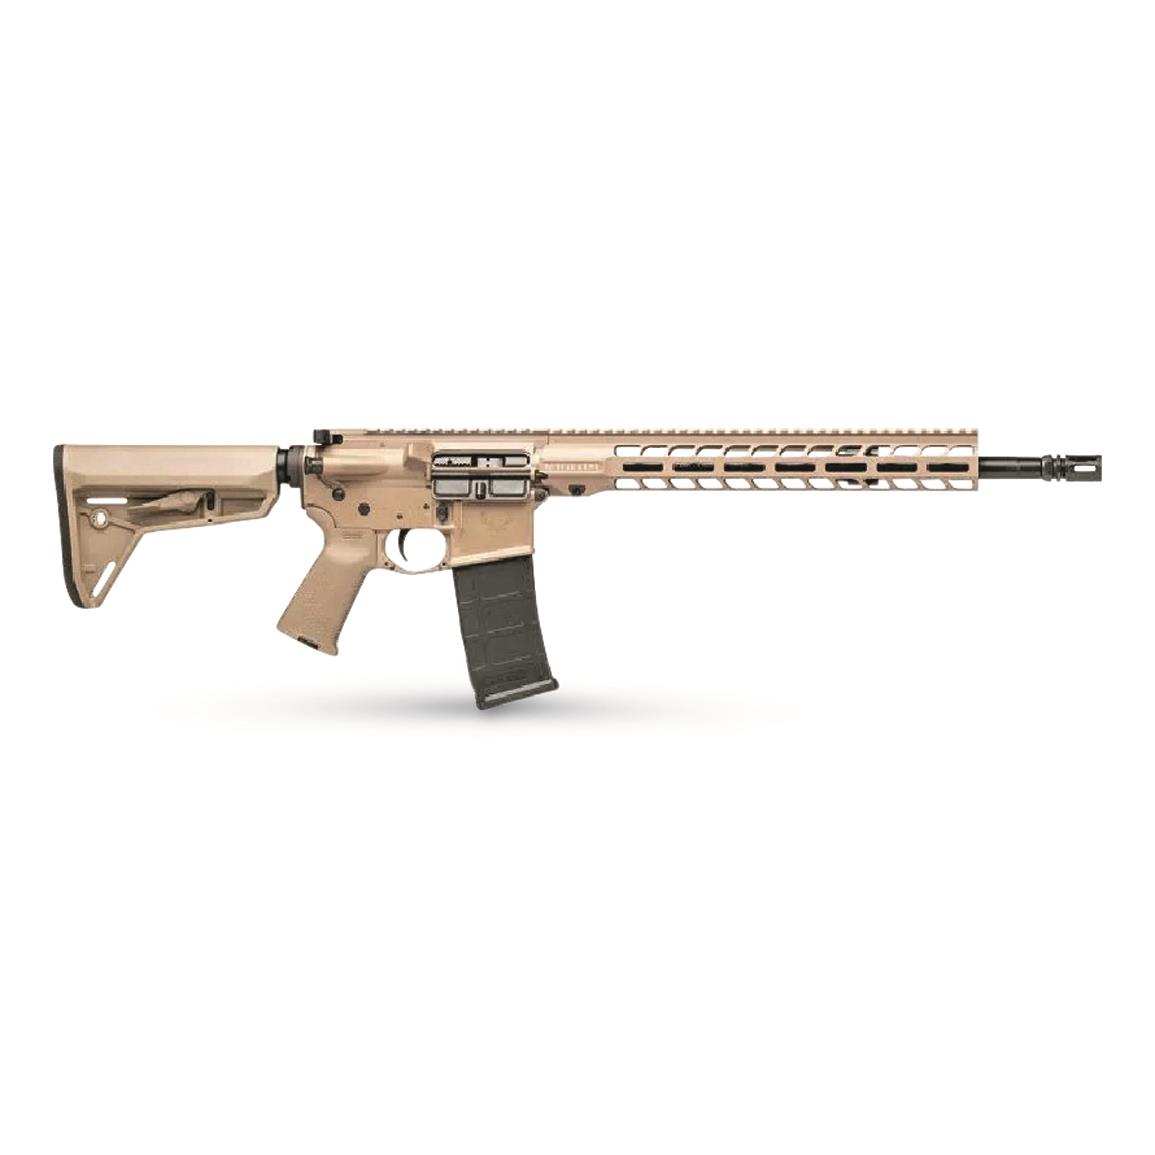 Stag Arms Stag-15 Tactical AR-15, Semi-automatic, 5.56 NATO/.223 Rem., 16" Barrel, 30+1 Rds.